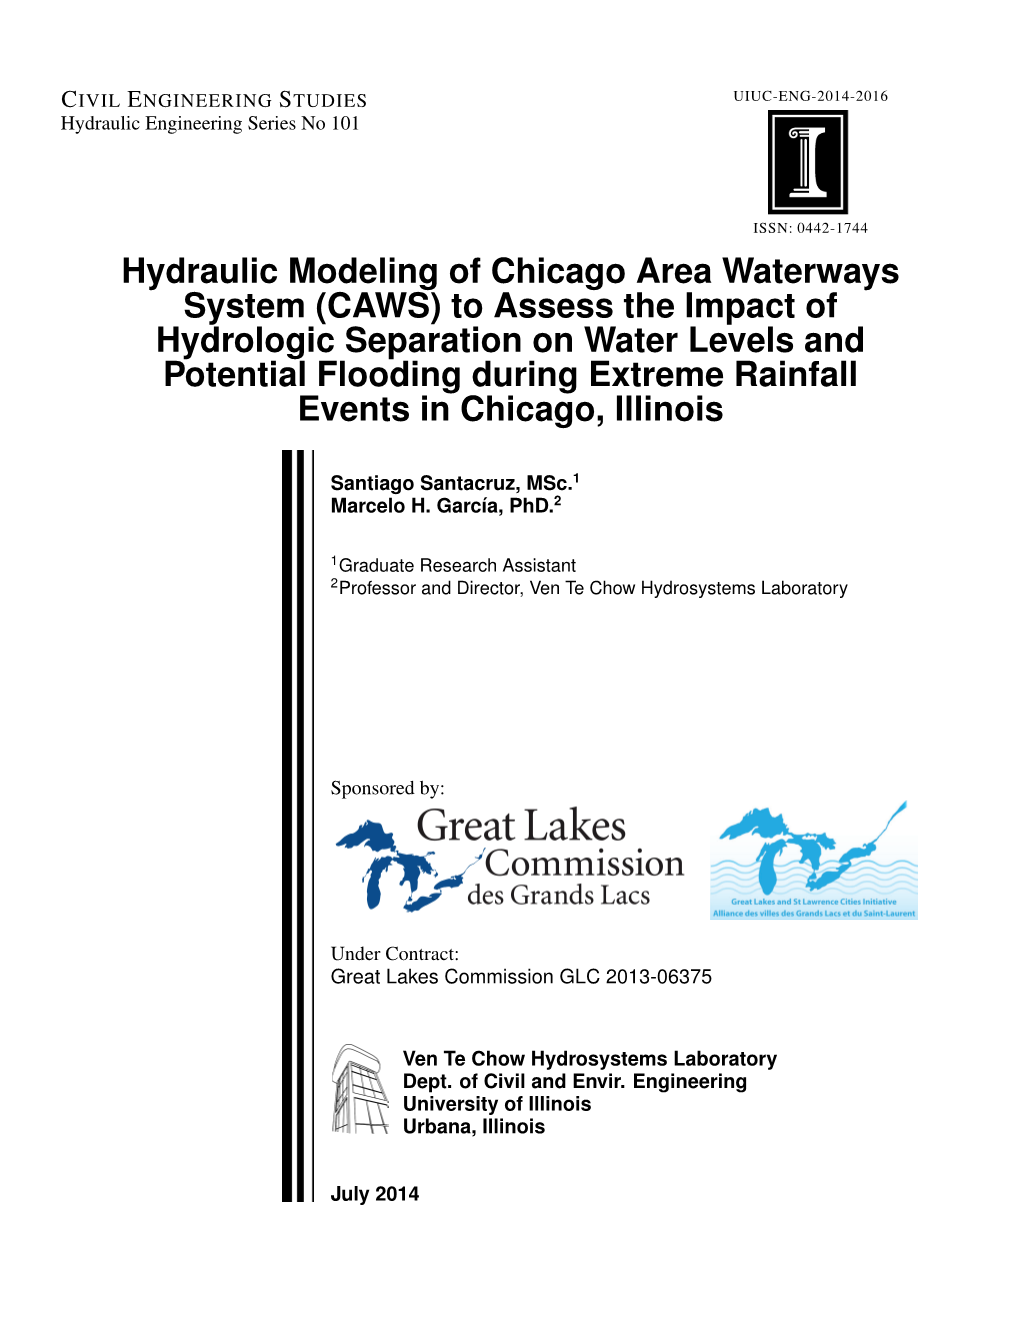 Hydraulic Modeling of Chicago Area Waterways System (CAWS)